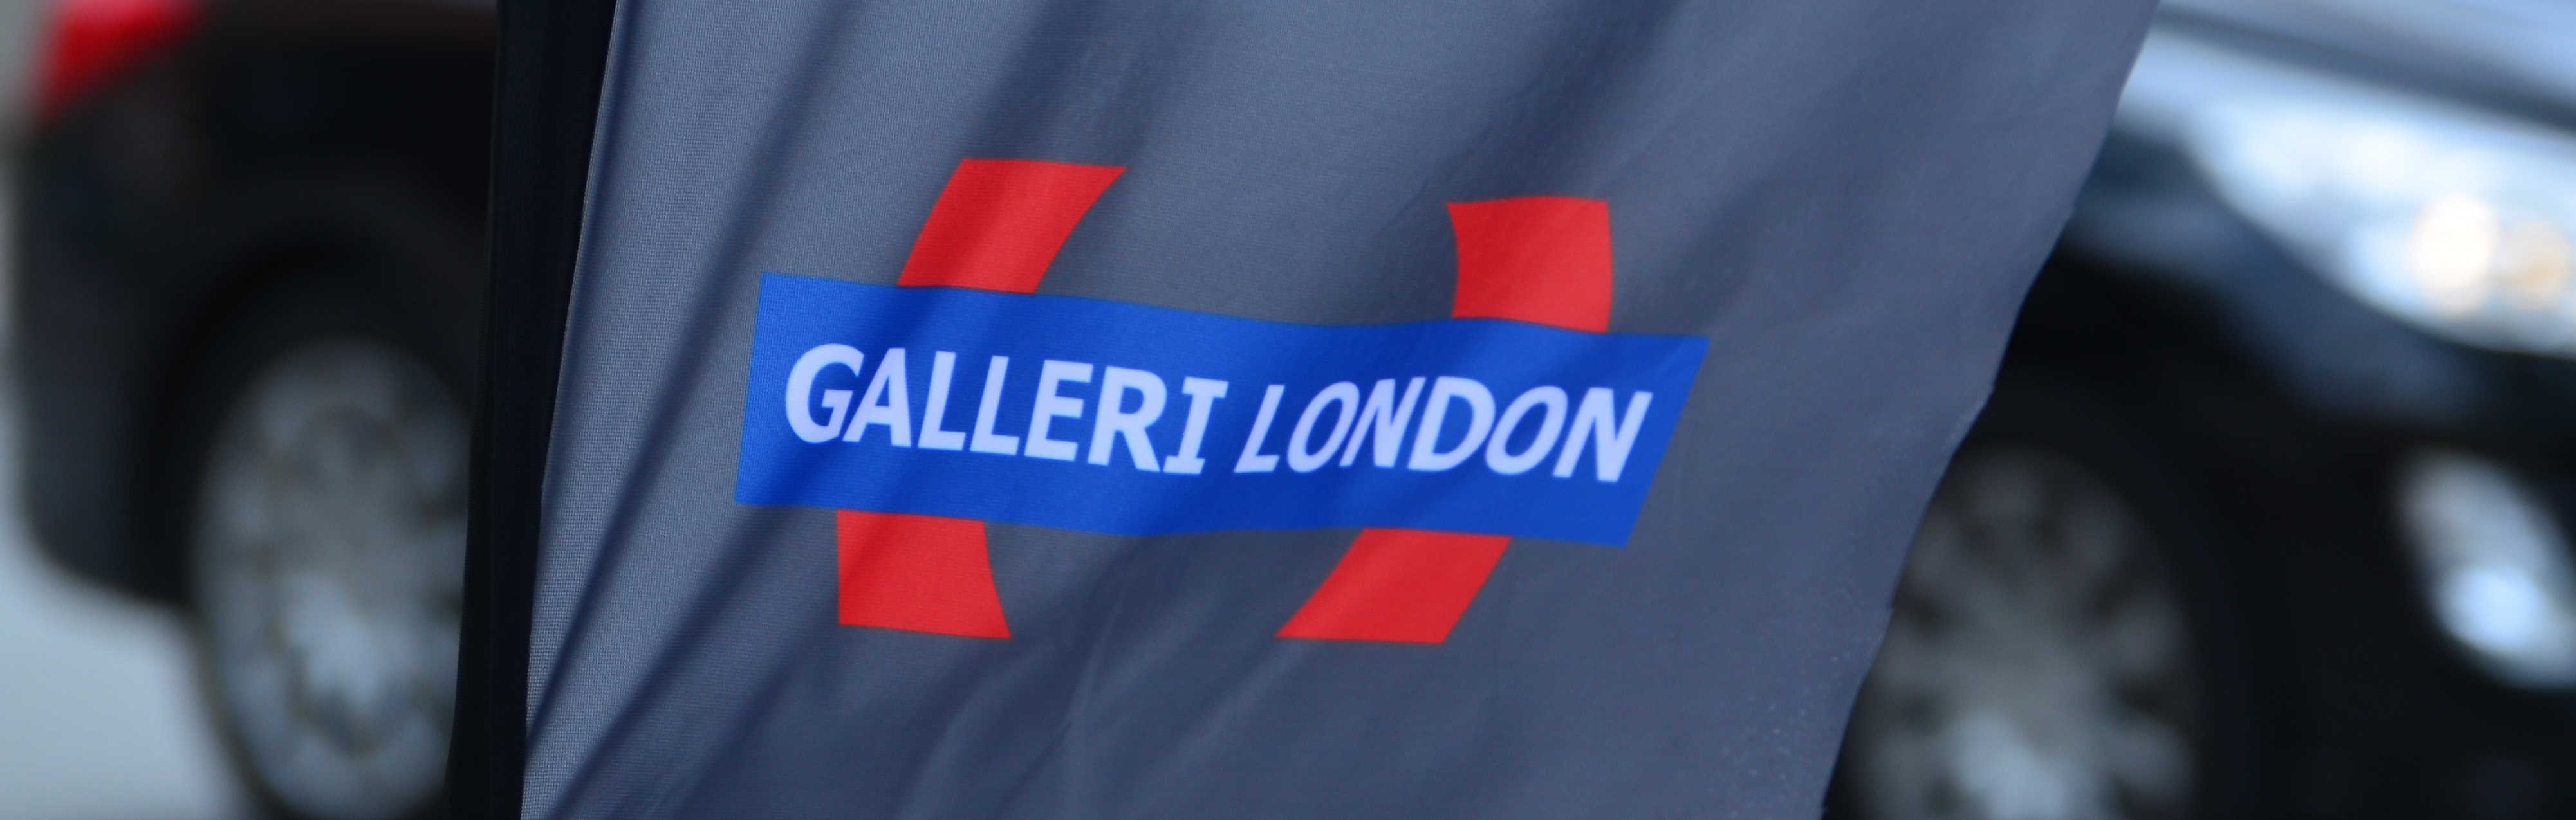 Link to Galleri London Facebook page